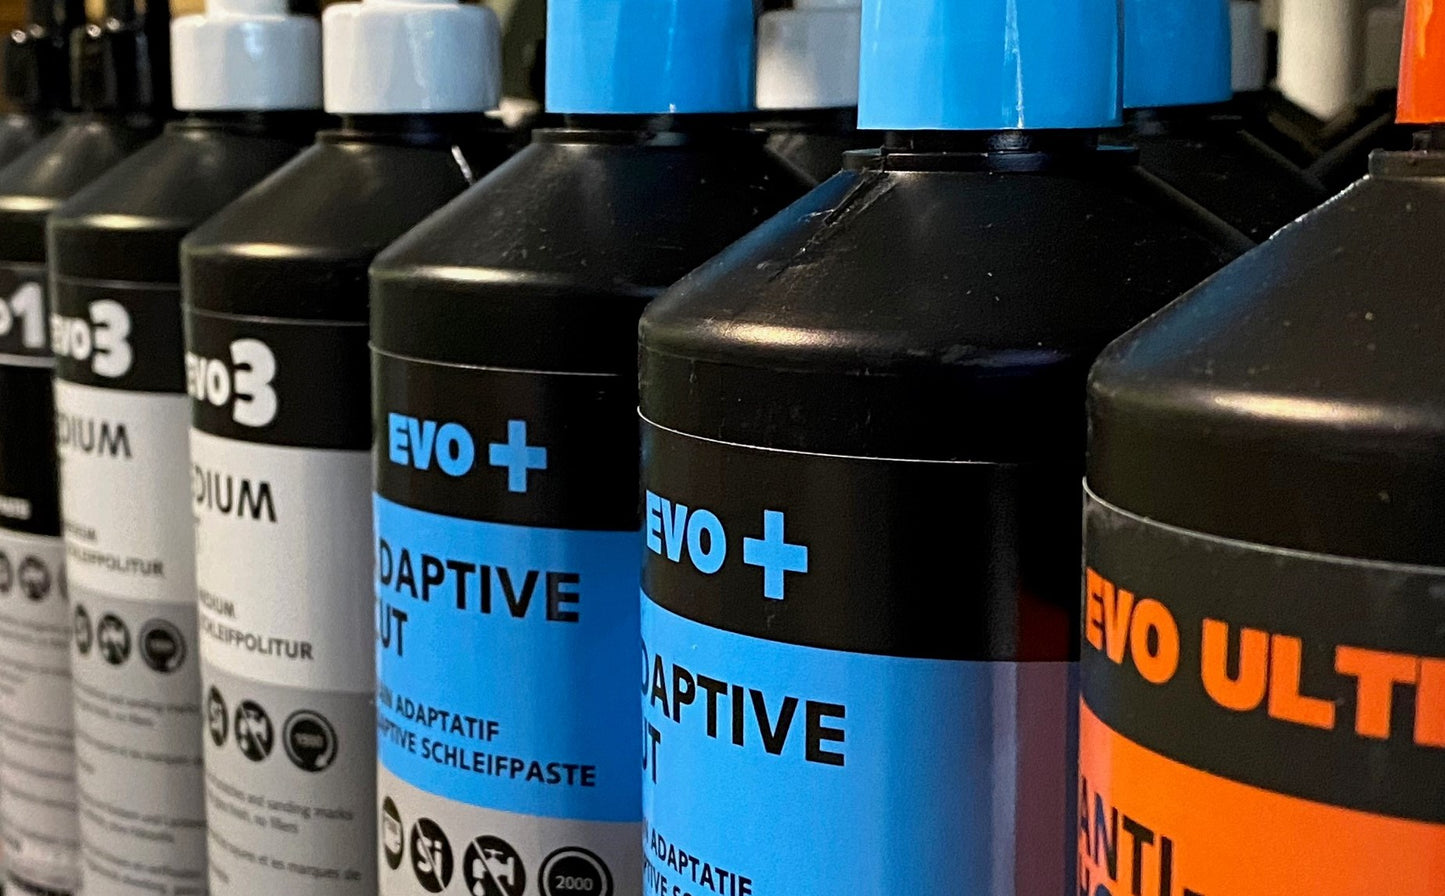 Evo 1 - Fine Finishing Compound 1ltrFine Finishing Compound A fine finishing compound for the removal of fine scratches, polishing marks and holograms. Leaves a swirl-free high gloss finish. Fine diminishing abrasive for a high gloss finish Low dust Free